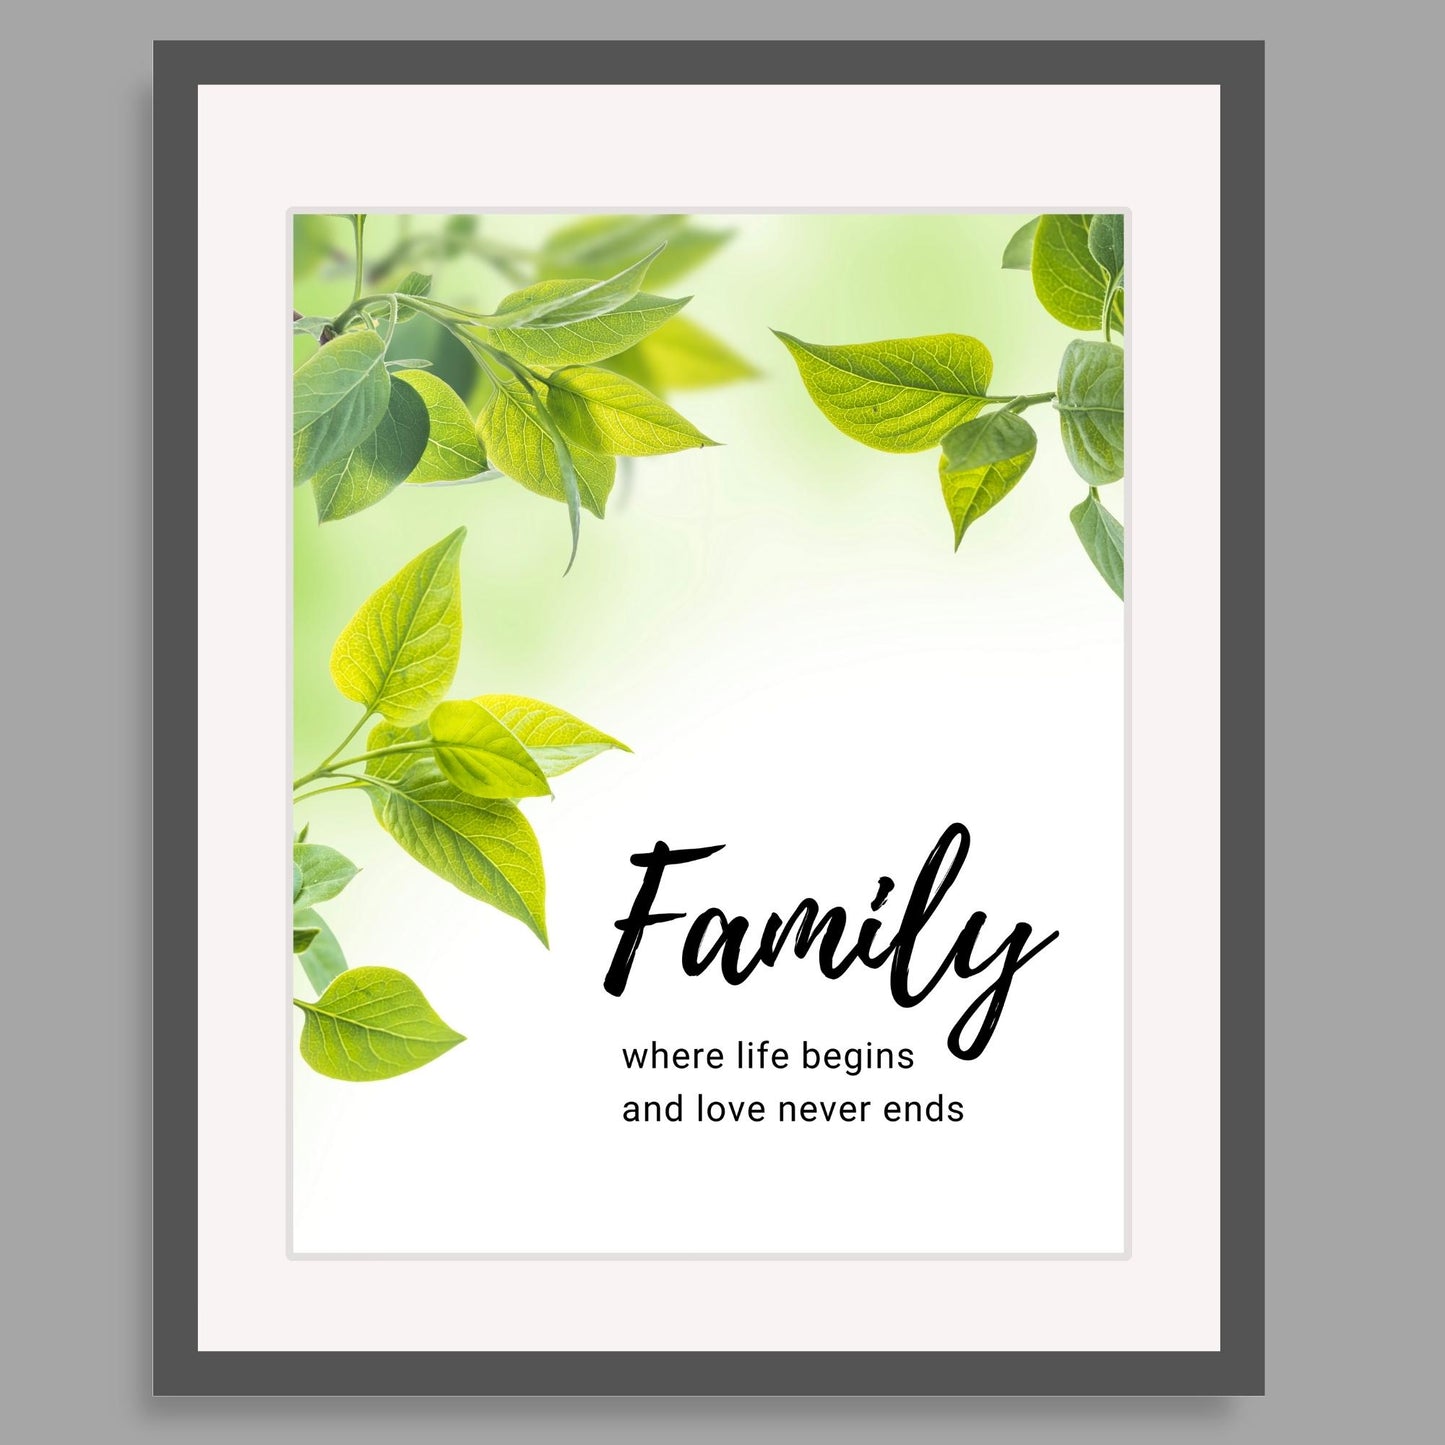 Inspirational Word Art - Family, where life begins and love never ends - Green Leaves Wall Decor (8x10 print) | shown in deep gray frame against light gray interior wall | oak7west.com